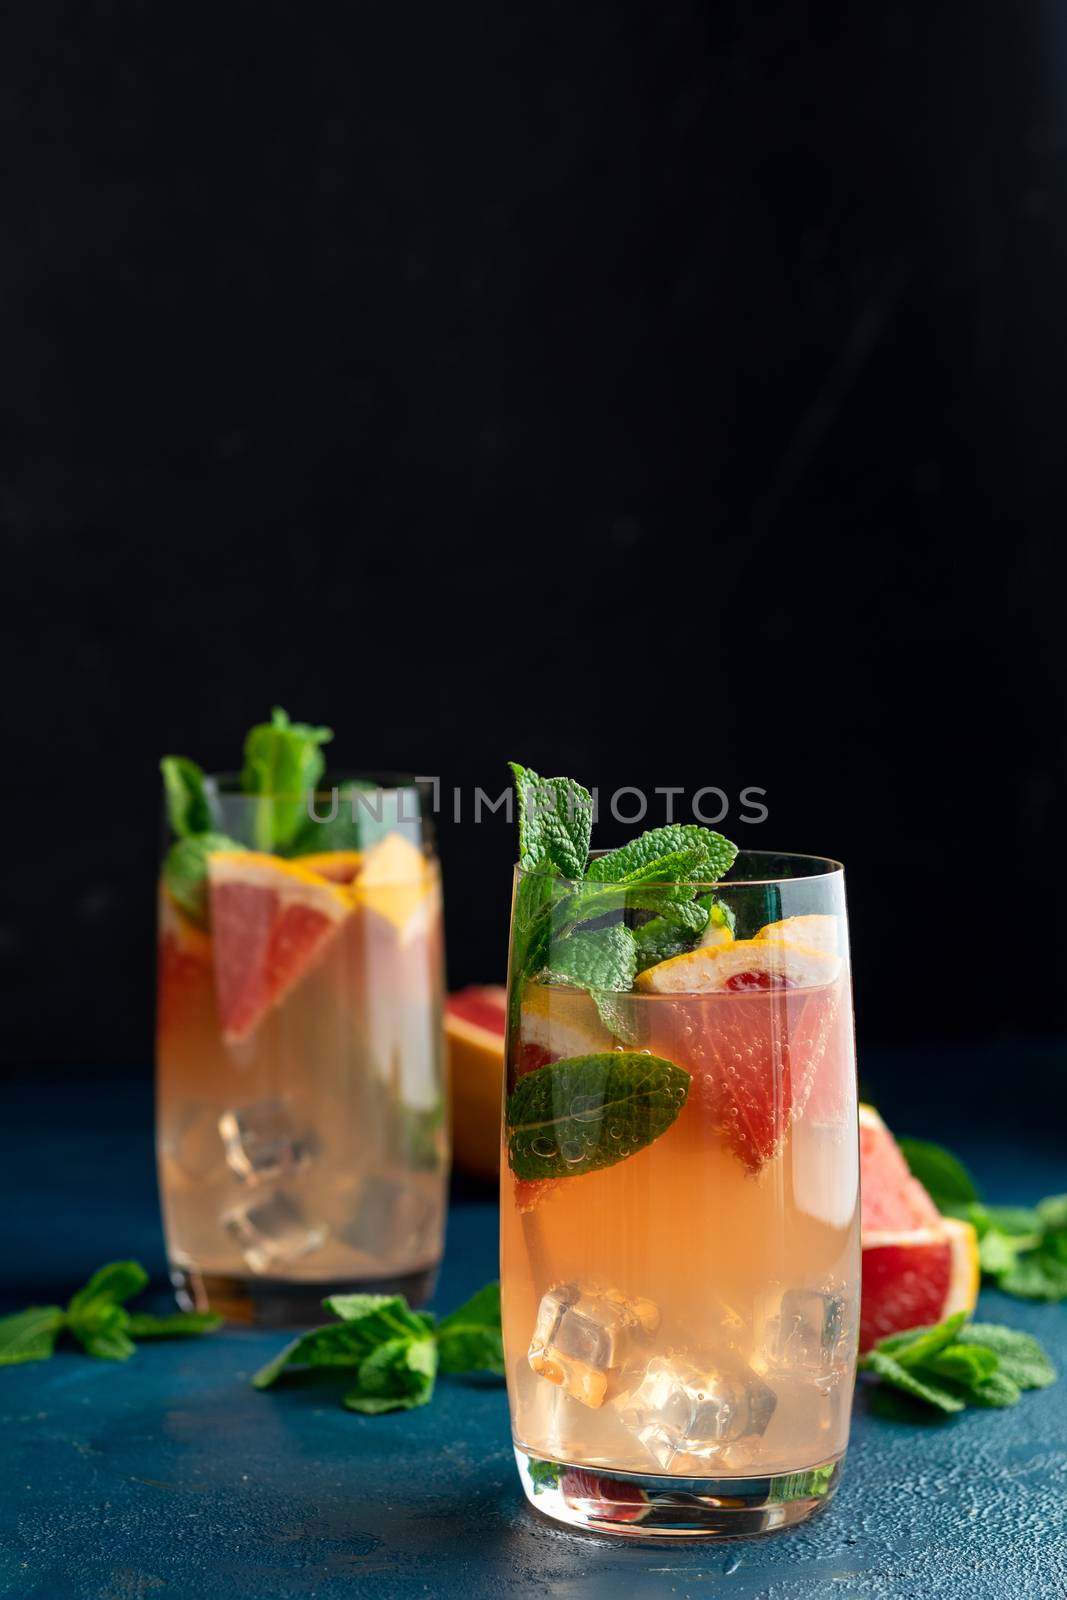 Grapefruit and mint gin tonic drink  by ArtSvitlyna